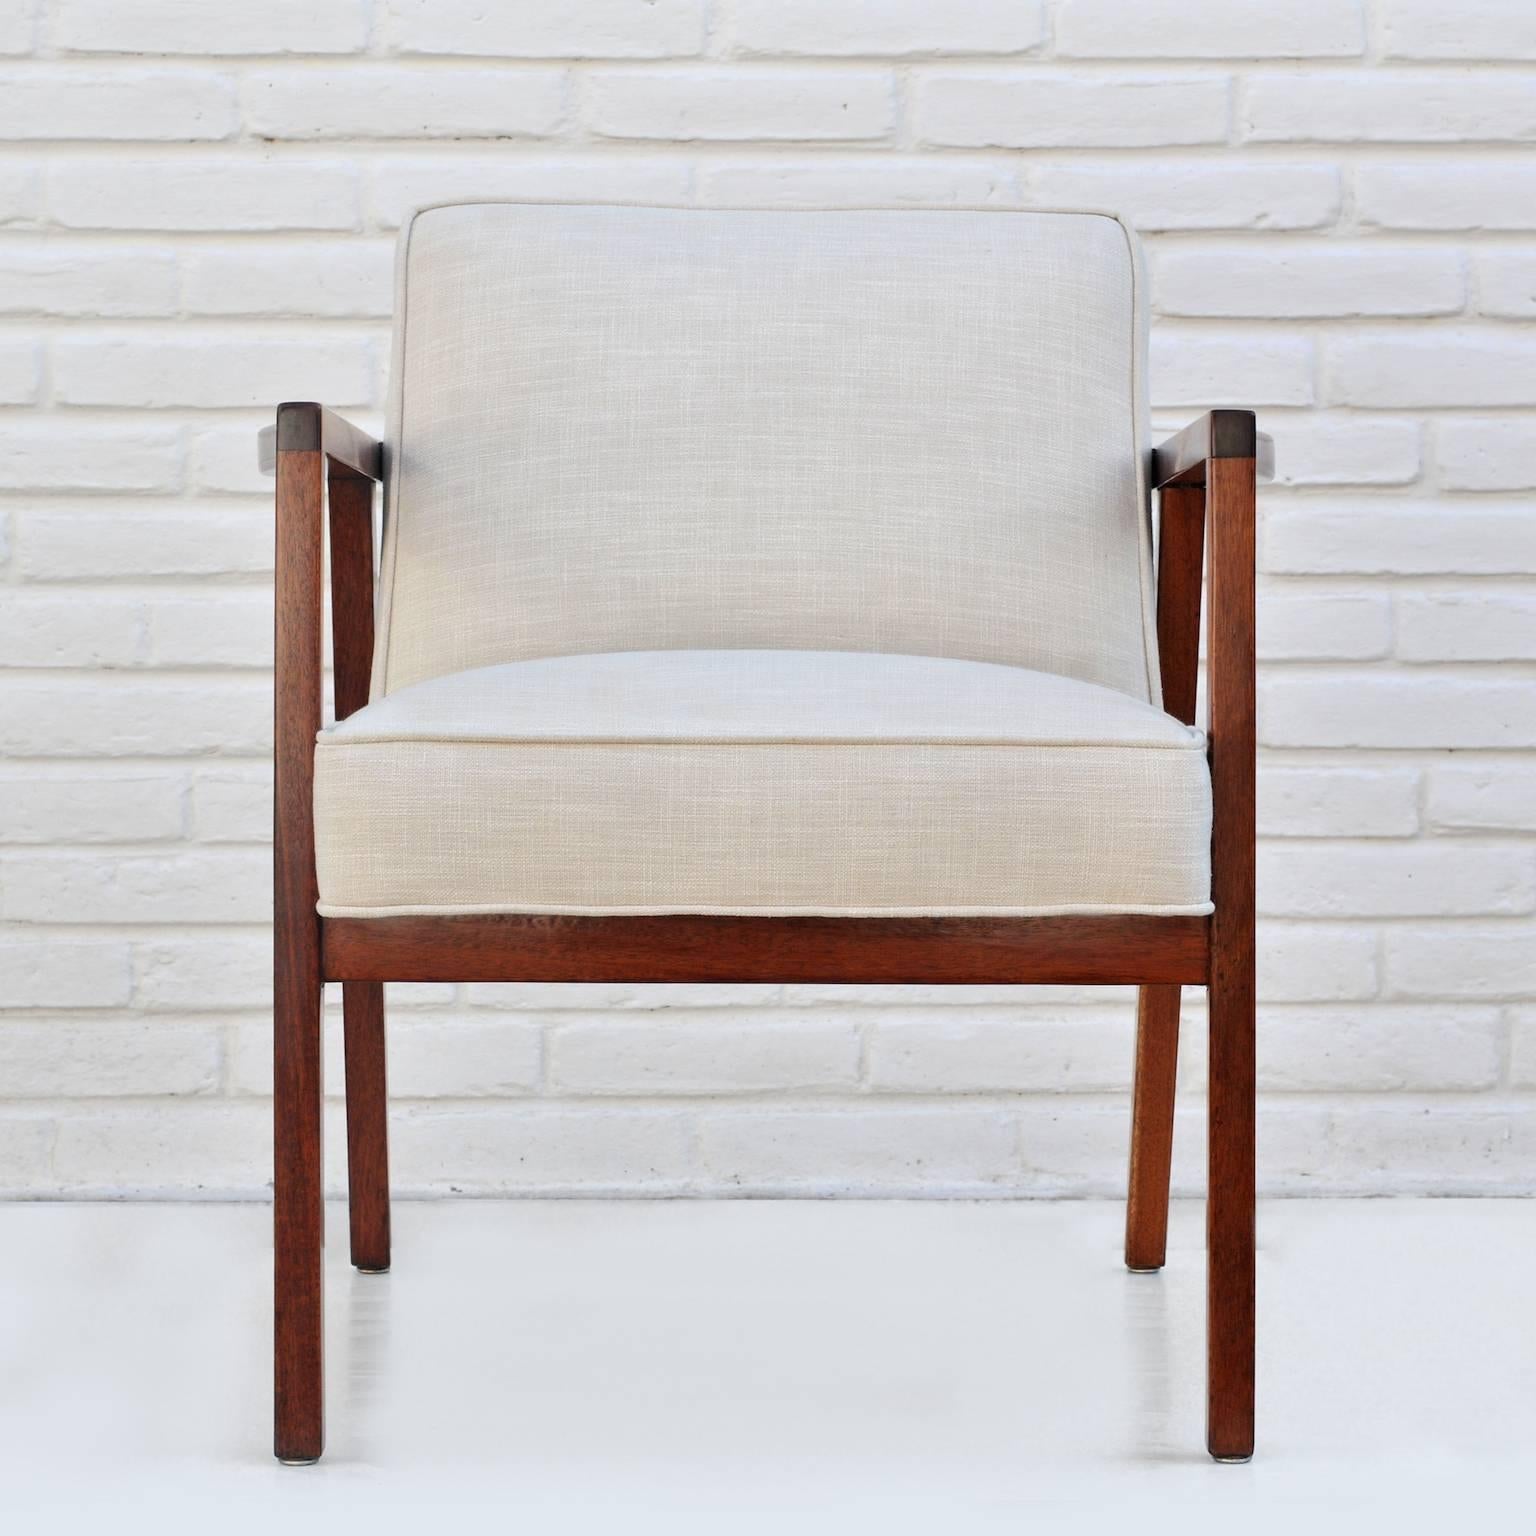 An elegant armchair made in Mexico with a crisp Silhouette. This particular mahogany has beautiful deep red tones that are brought out by its creme upholstery.